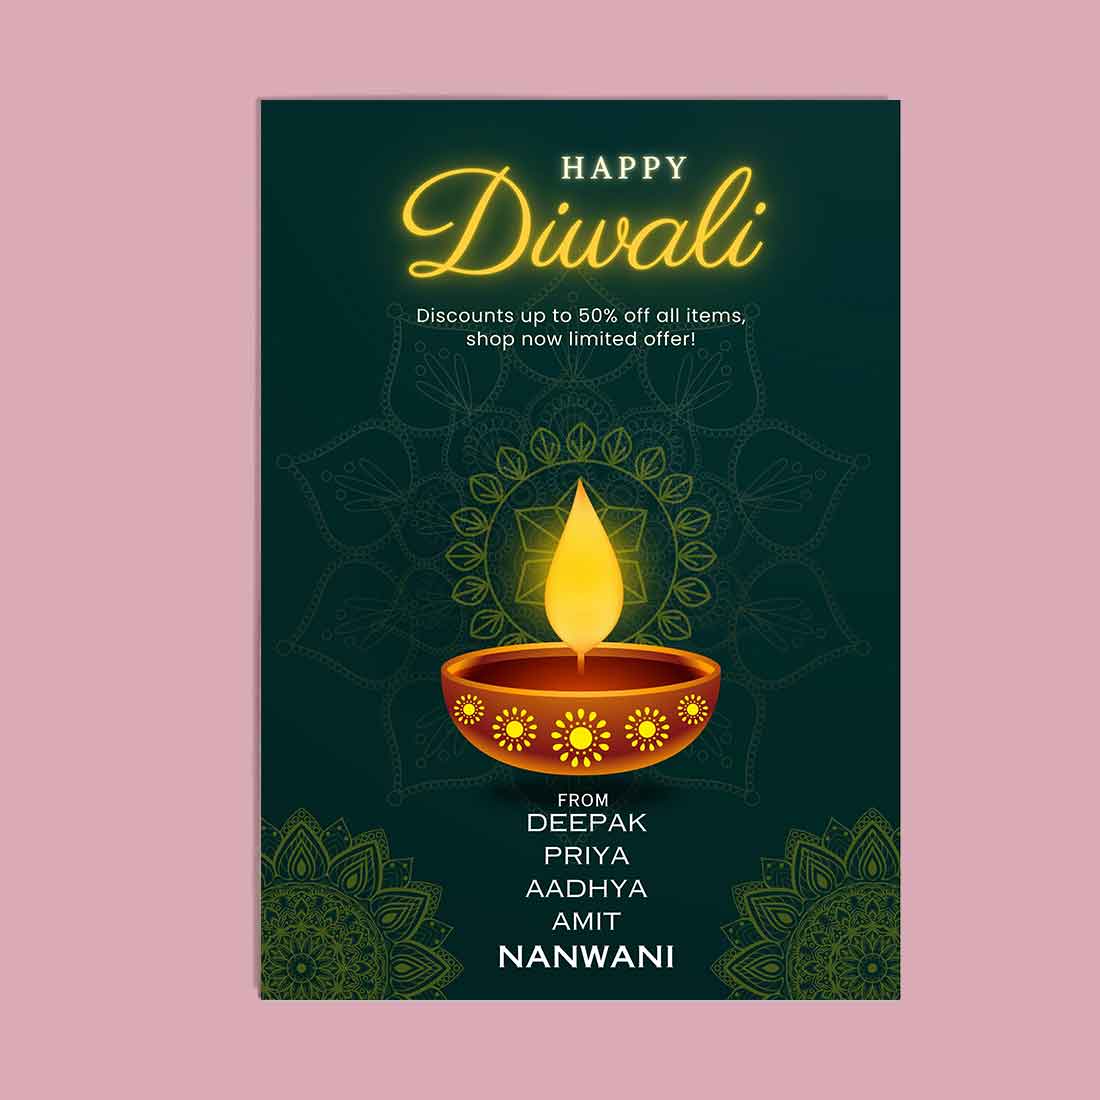 Diwali Gift Set with Lord Hanuman Lamp 10 gm Silver Coin and Greeting Card